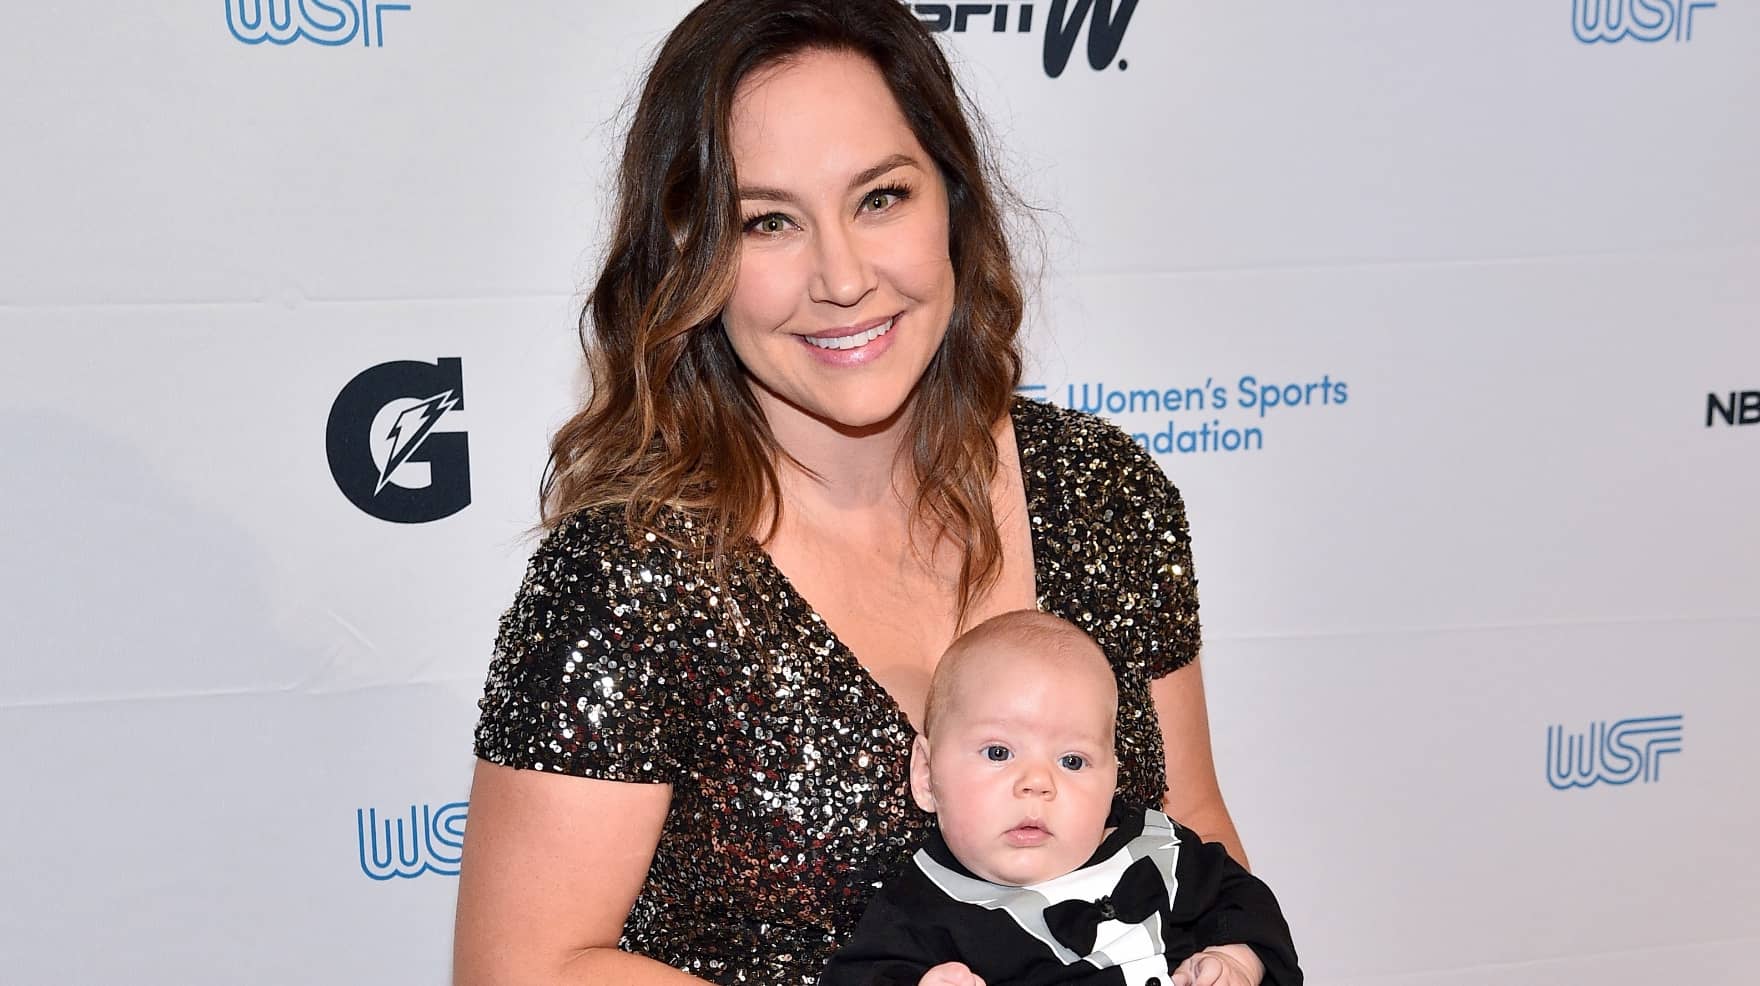 WSF Past President Alana Nichols, with her son, attends the Women’s Sports Foundation’s 40th Annual Salute to Women in Sports, celebrating the most accomplished women in sports and the girls they inspire at Cipriani Wall Street on October 16, 2019 in New York City. (Photo by Theo Wargo/Getty Images for WSF)